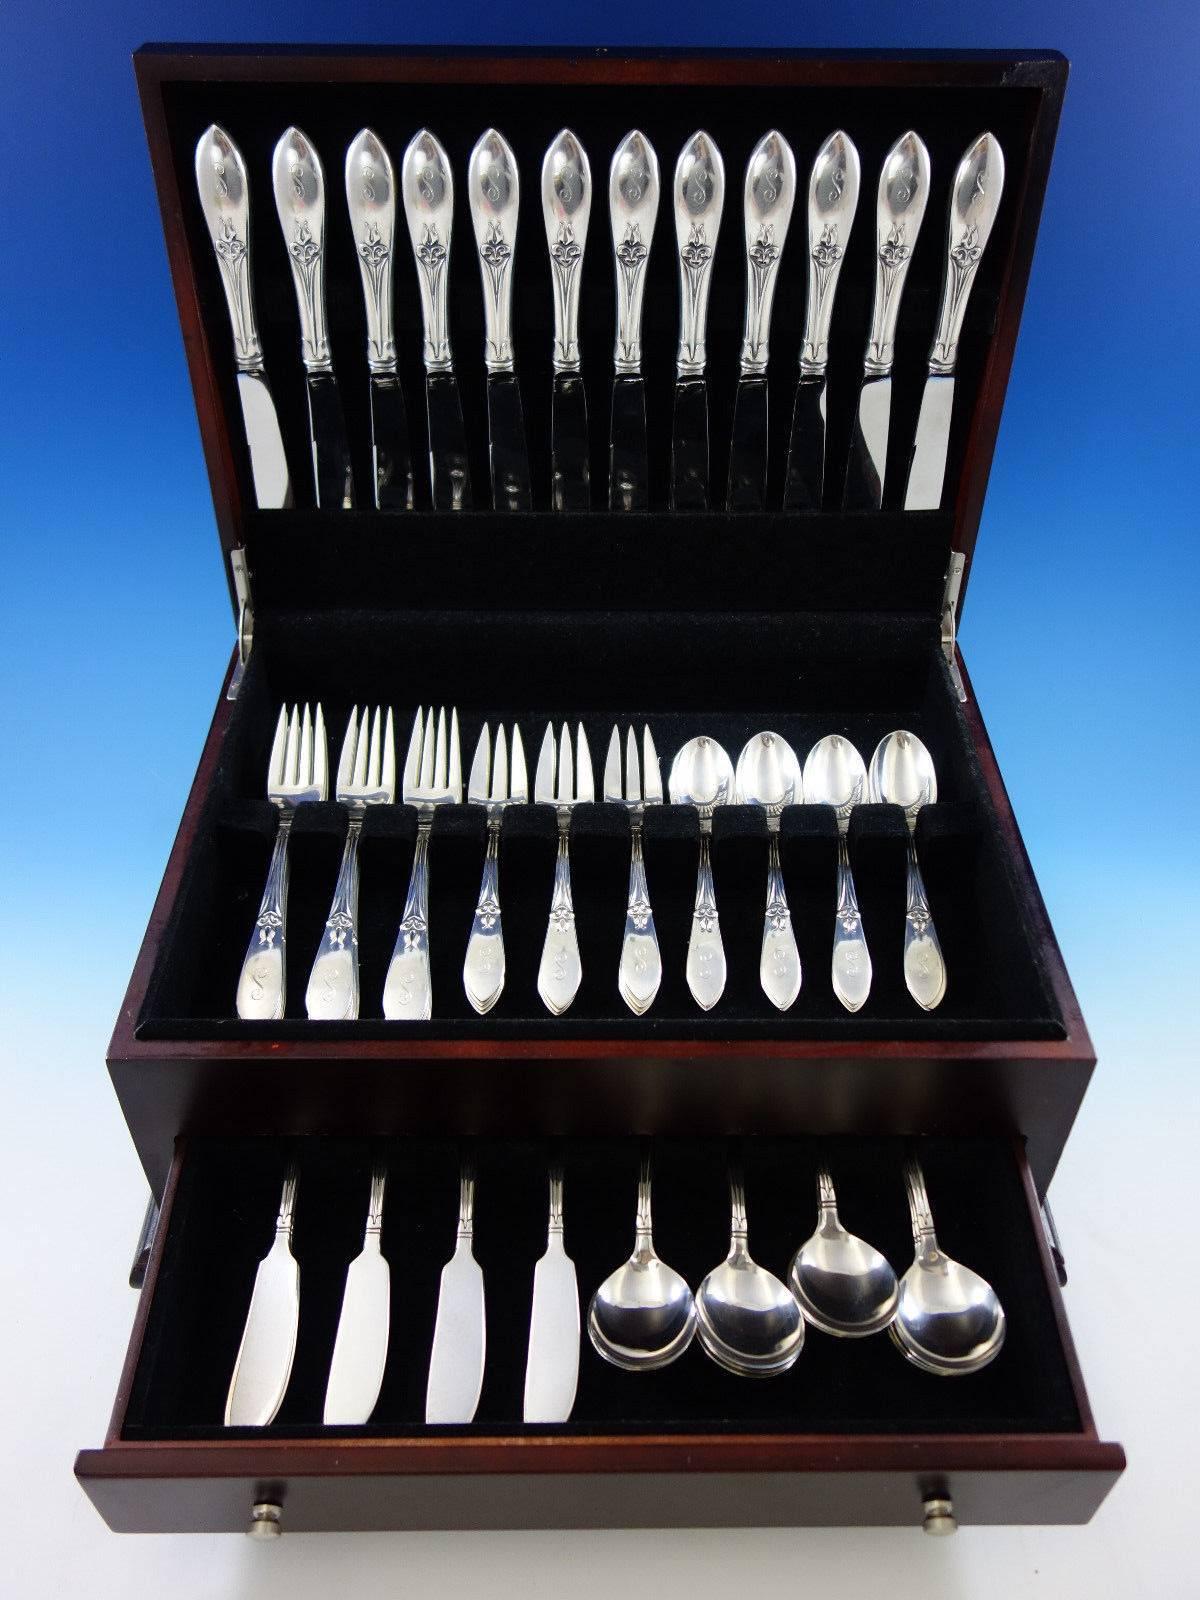 Outstanding Tulipan by Frank Smith sterling silver flatware set, 72 pieces. This set includes:

12 knives, 9 1/4